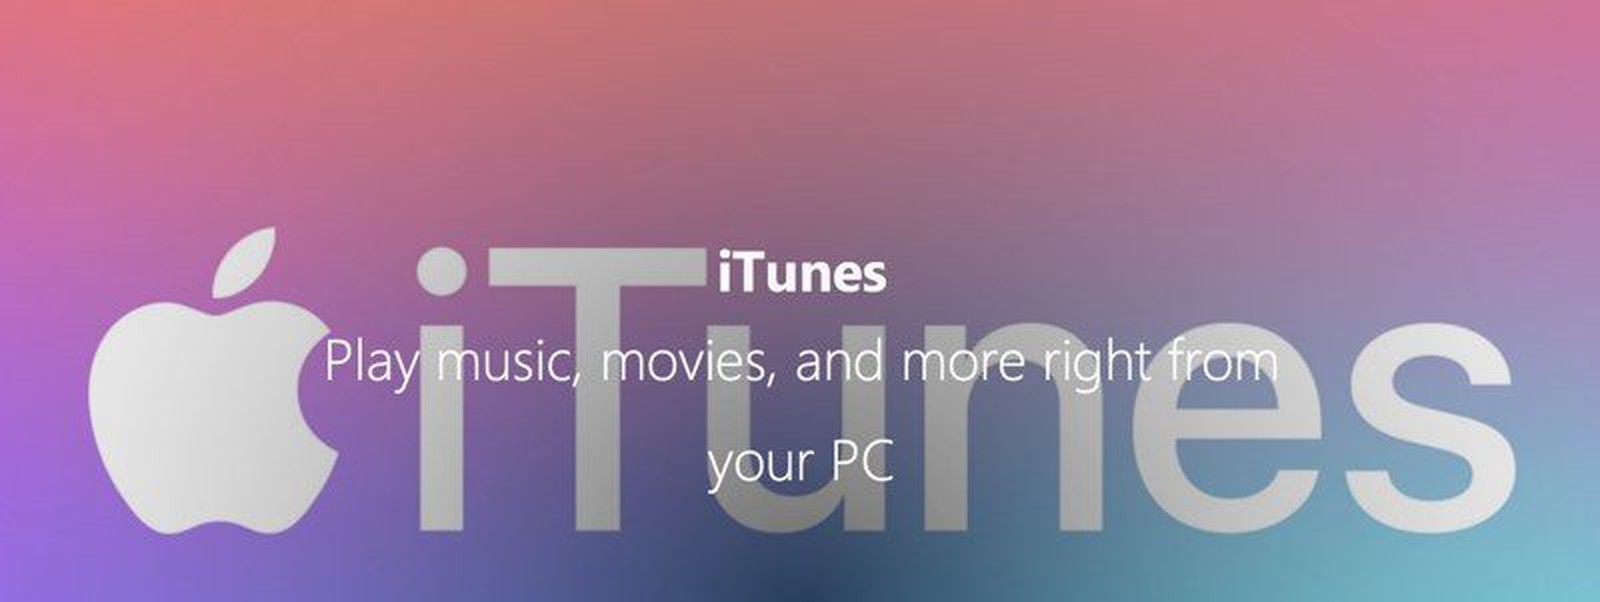 Apple's iTunes App Now Available Through Microsoft's Windows 10 Store ...